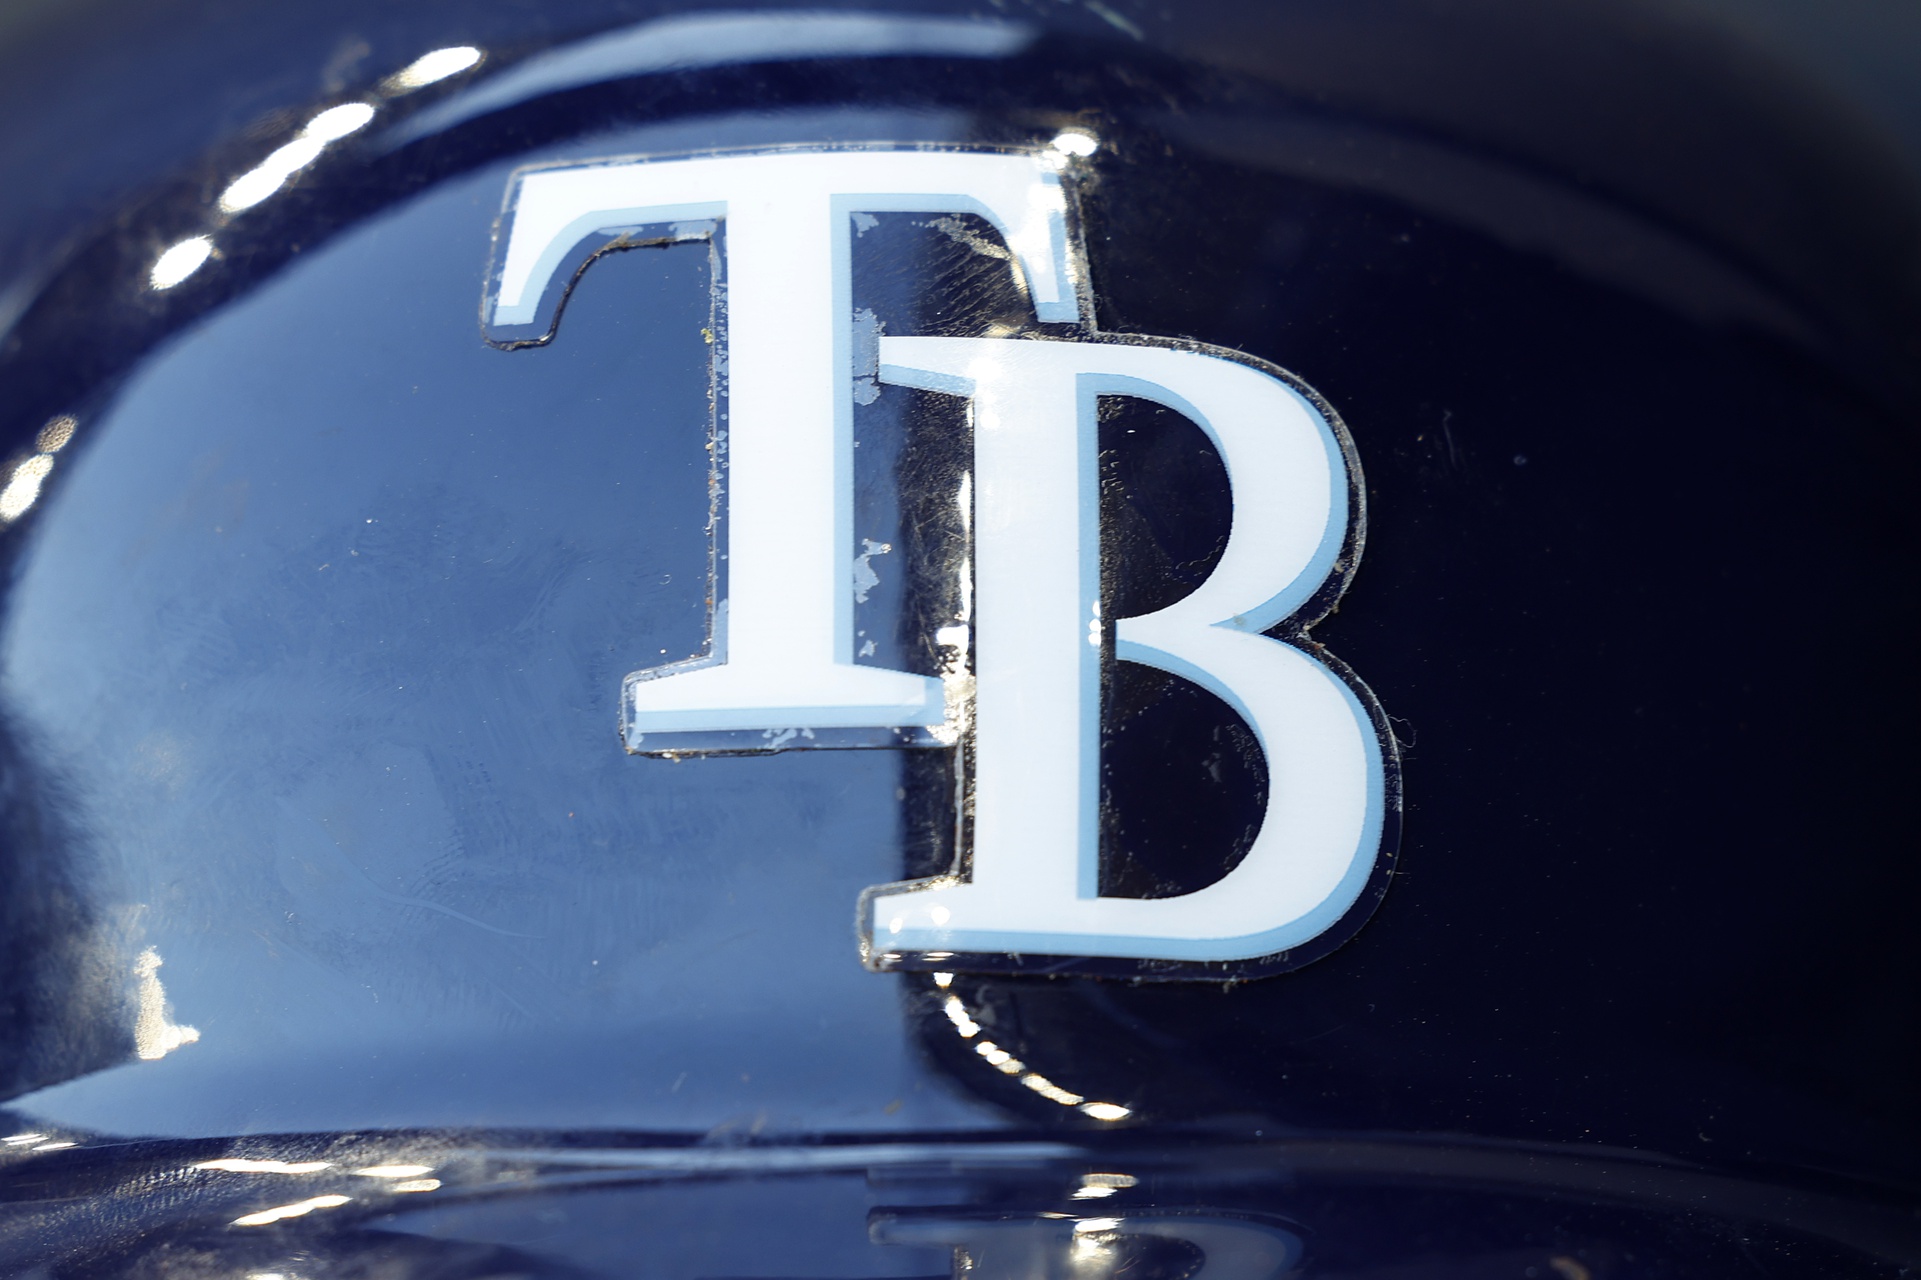 Tampa Bay Rays Acquire Pitcher from the Windy City Thunderbolts